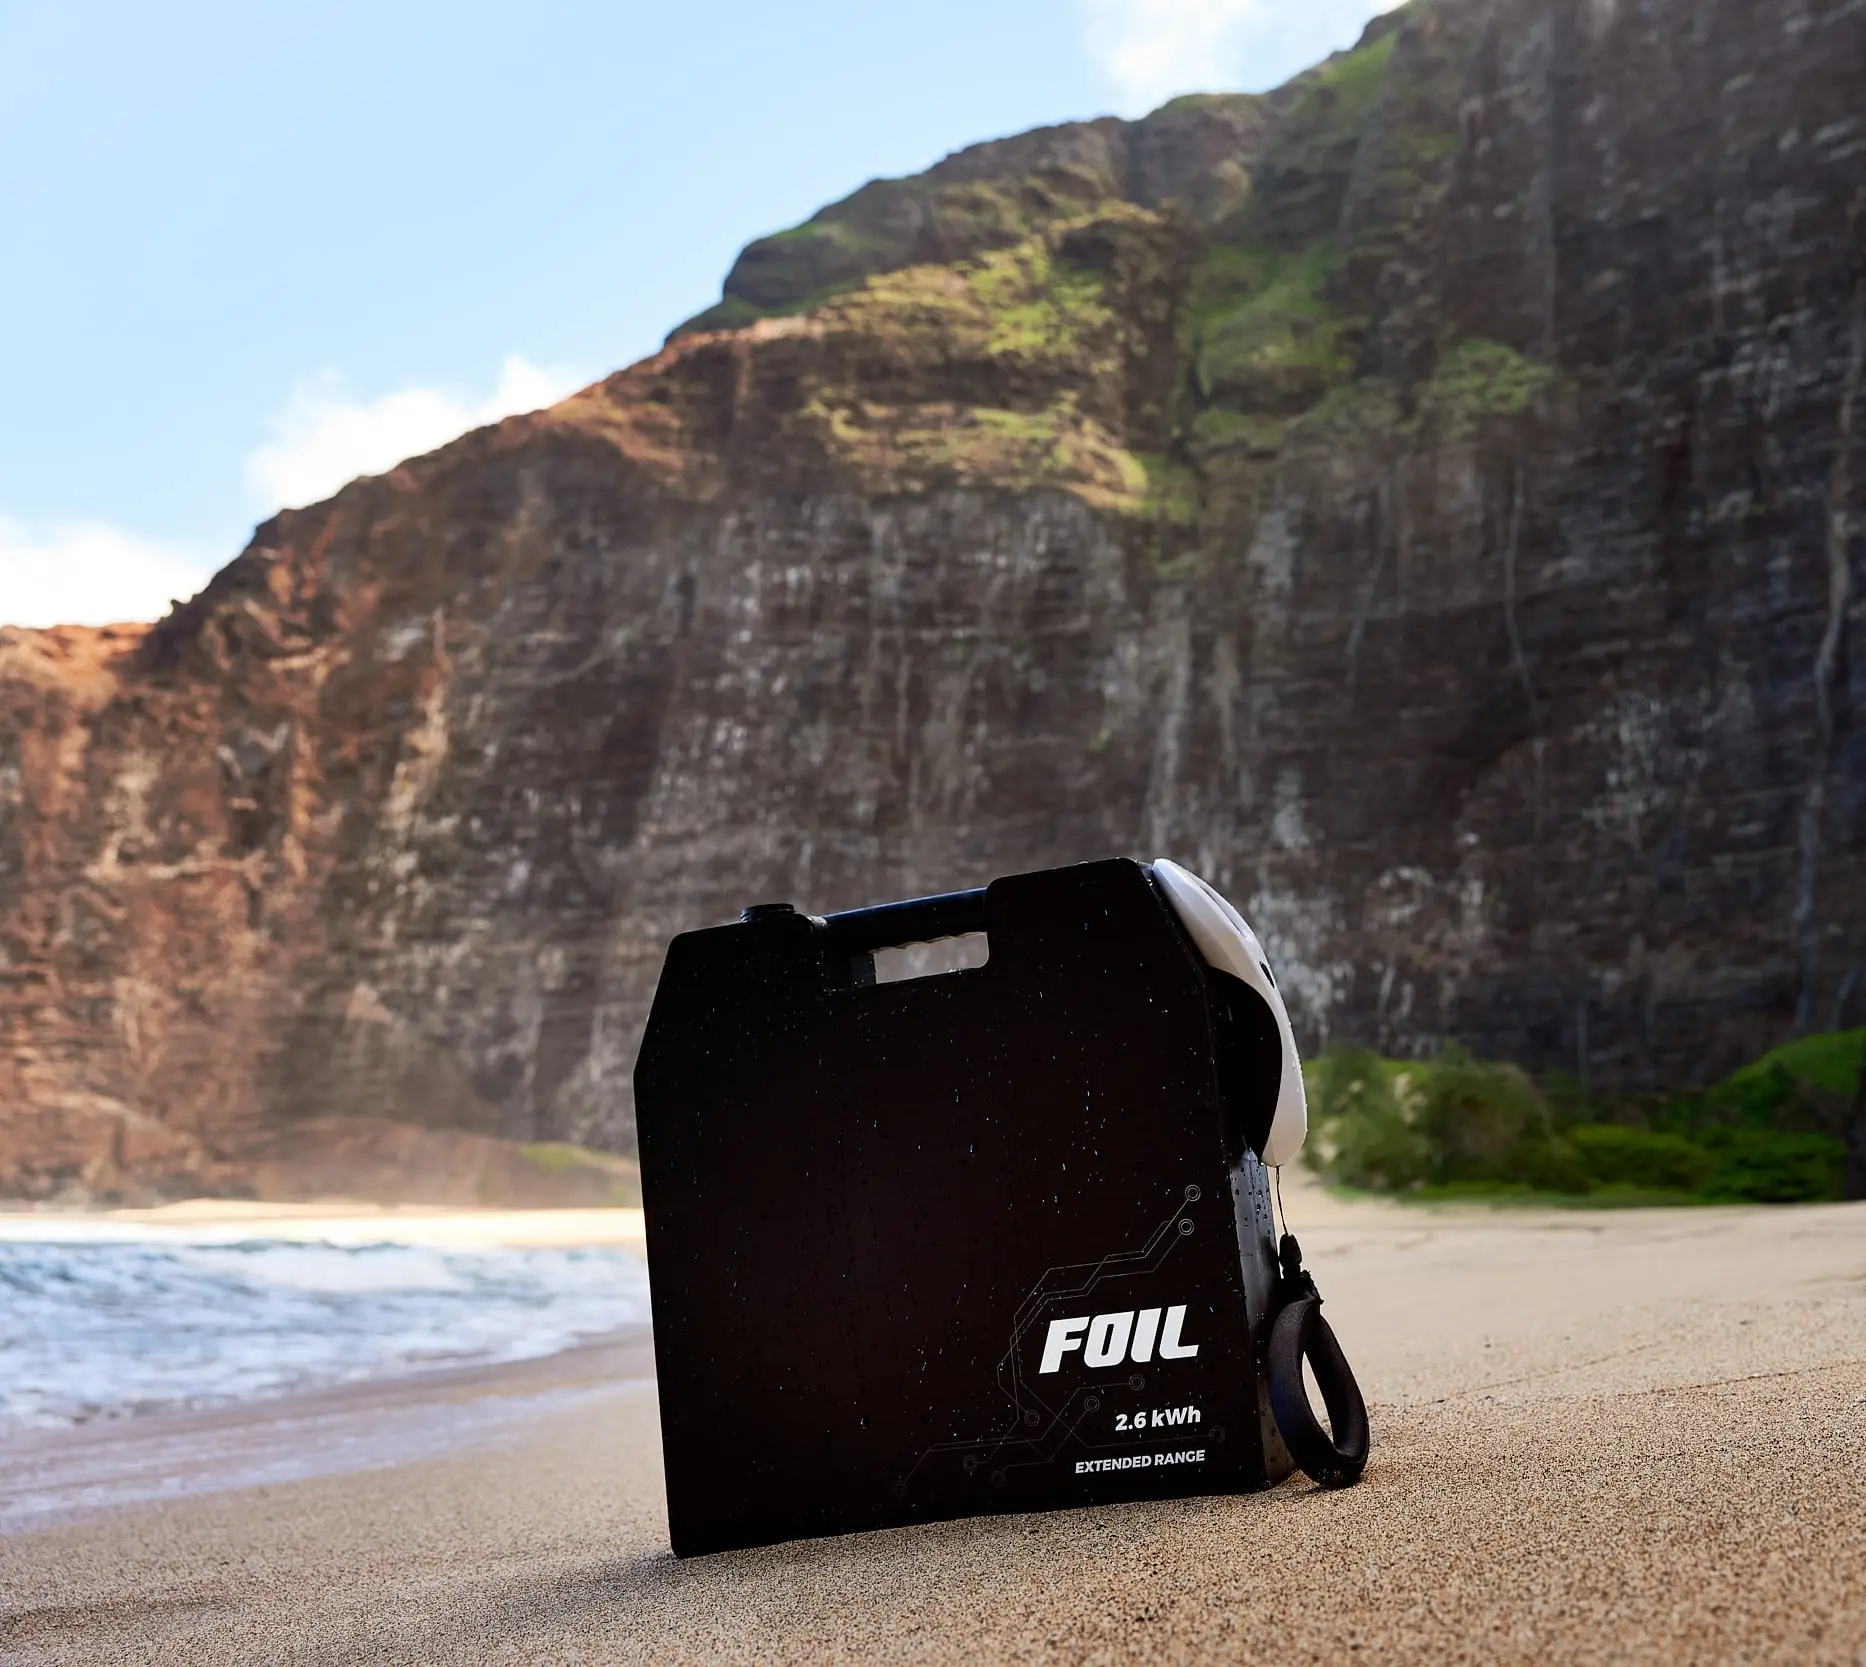 The FOIL 2.6 kWh battery resting on a beach. Breathtaking cliff walls, vibrant vegetation, and the ocean are visible in the background.